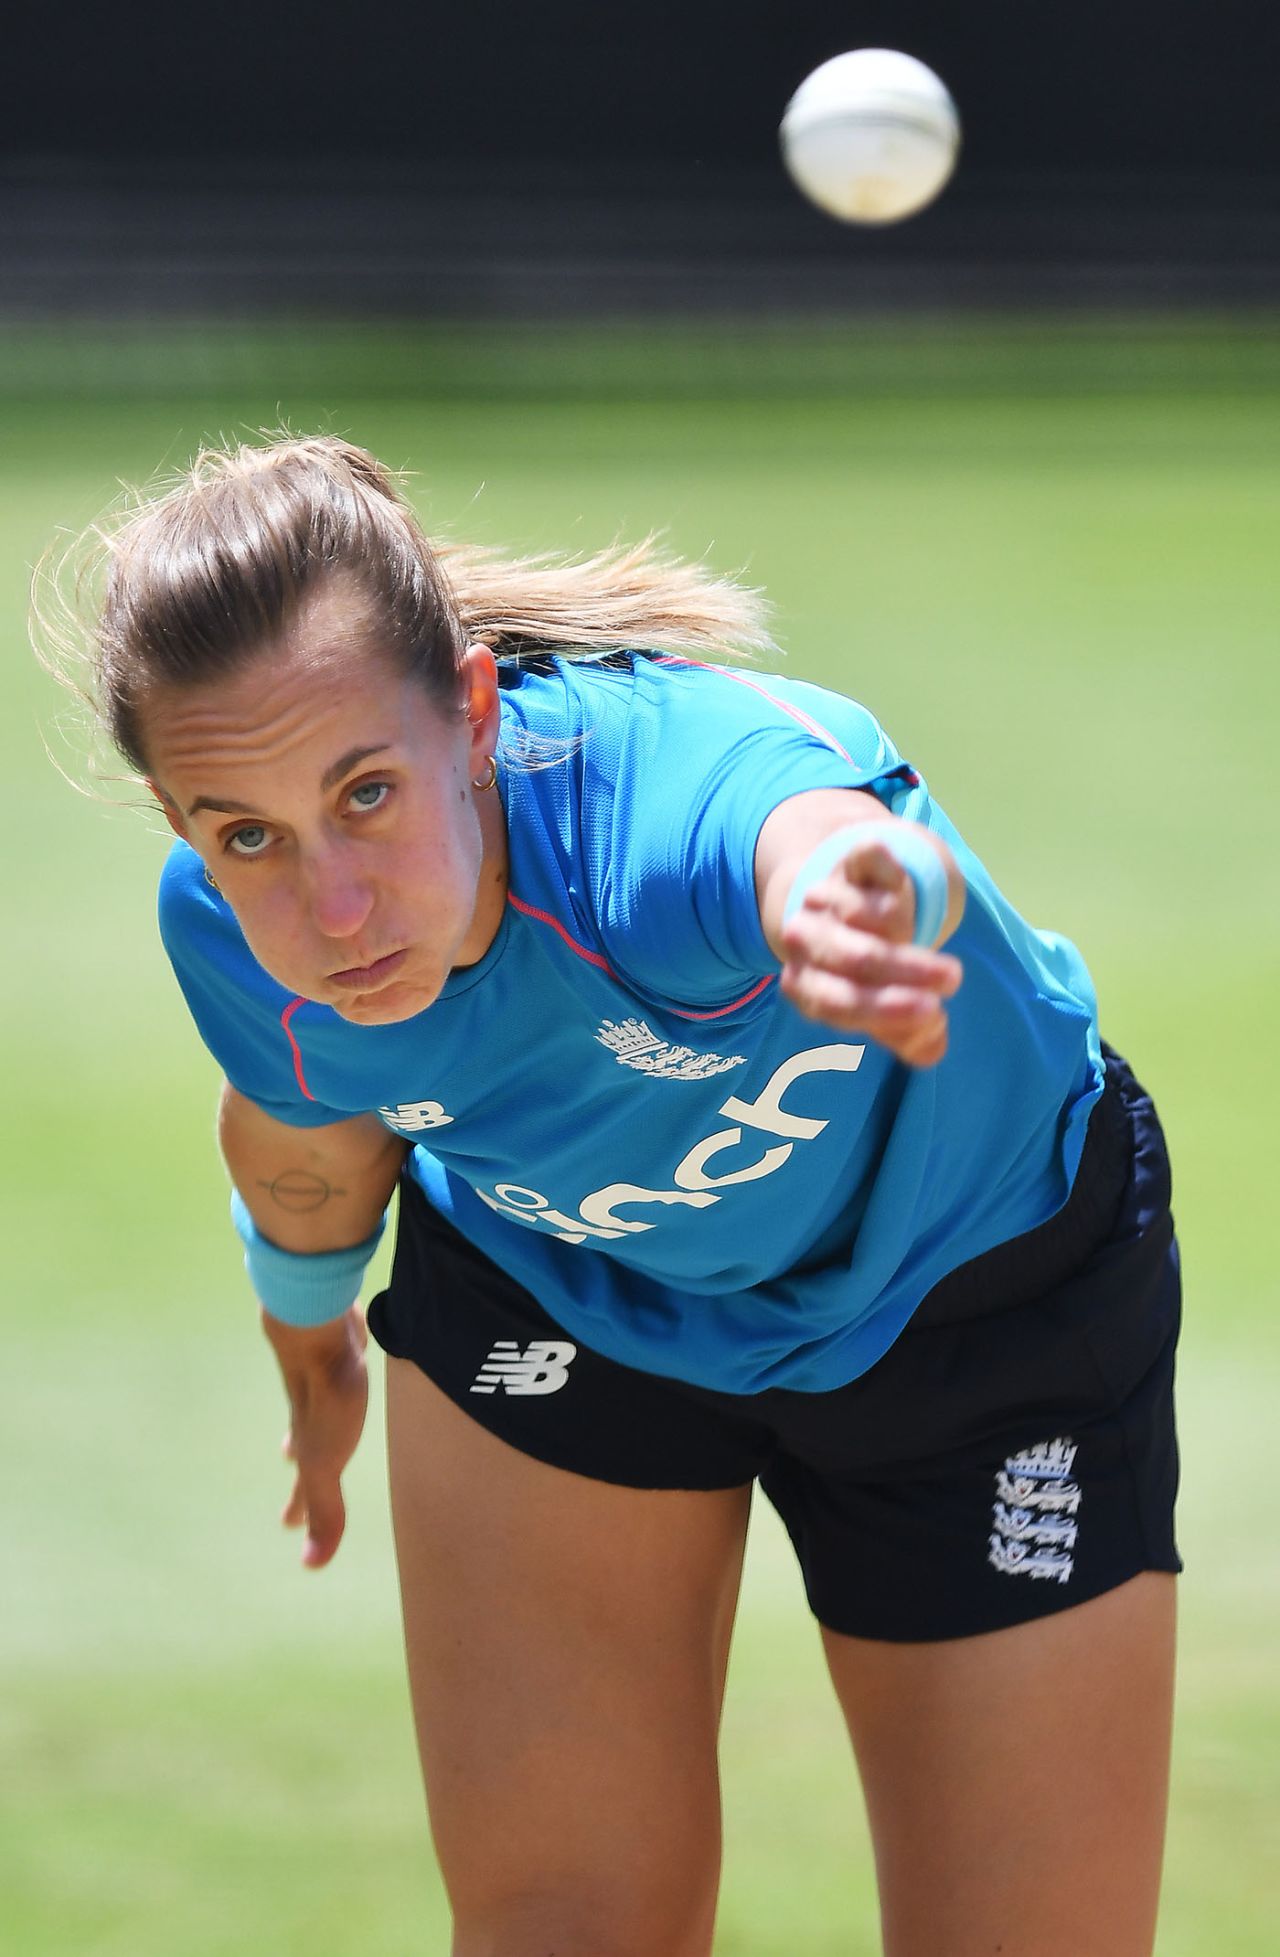 Tash Farrant bowls in the nets, England training, Adelaide, Women's Ashes, January 18, 2022